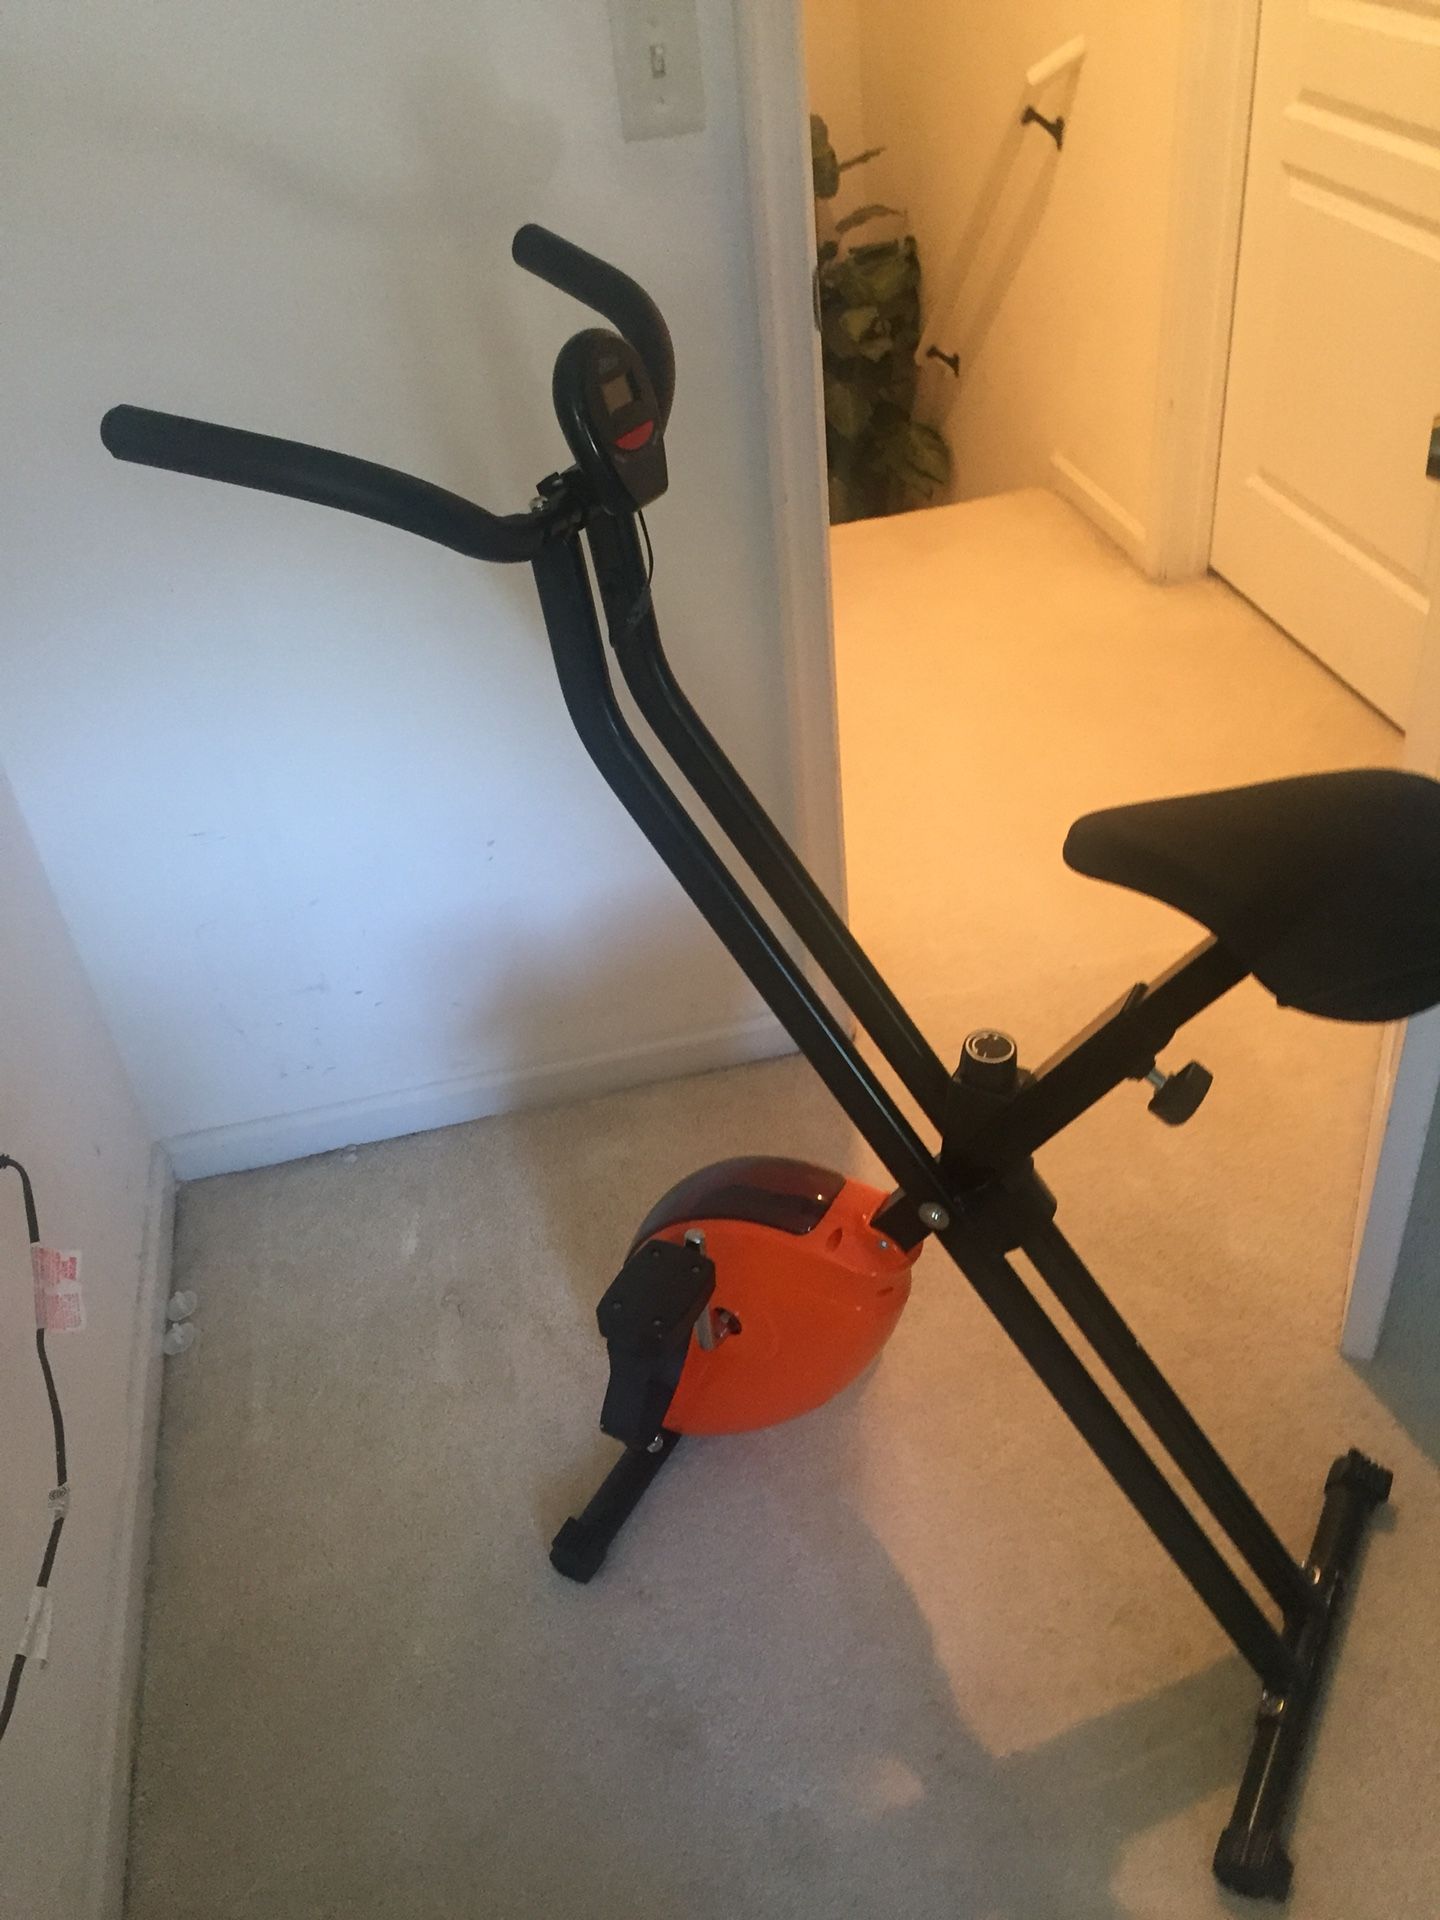 Light weight exercise bike, folds for easy storage. You’ll need to tighten seat Great condition